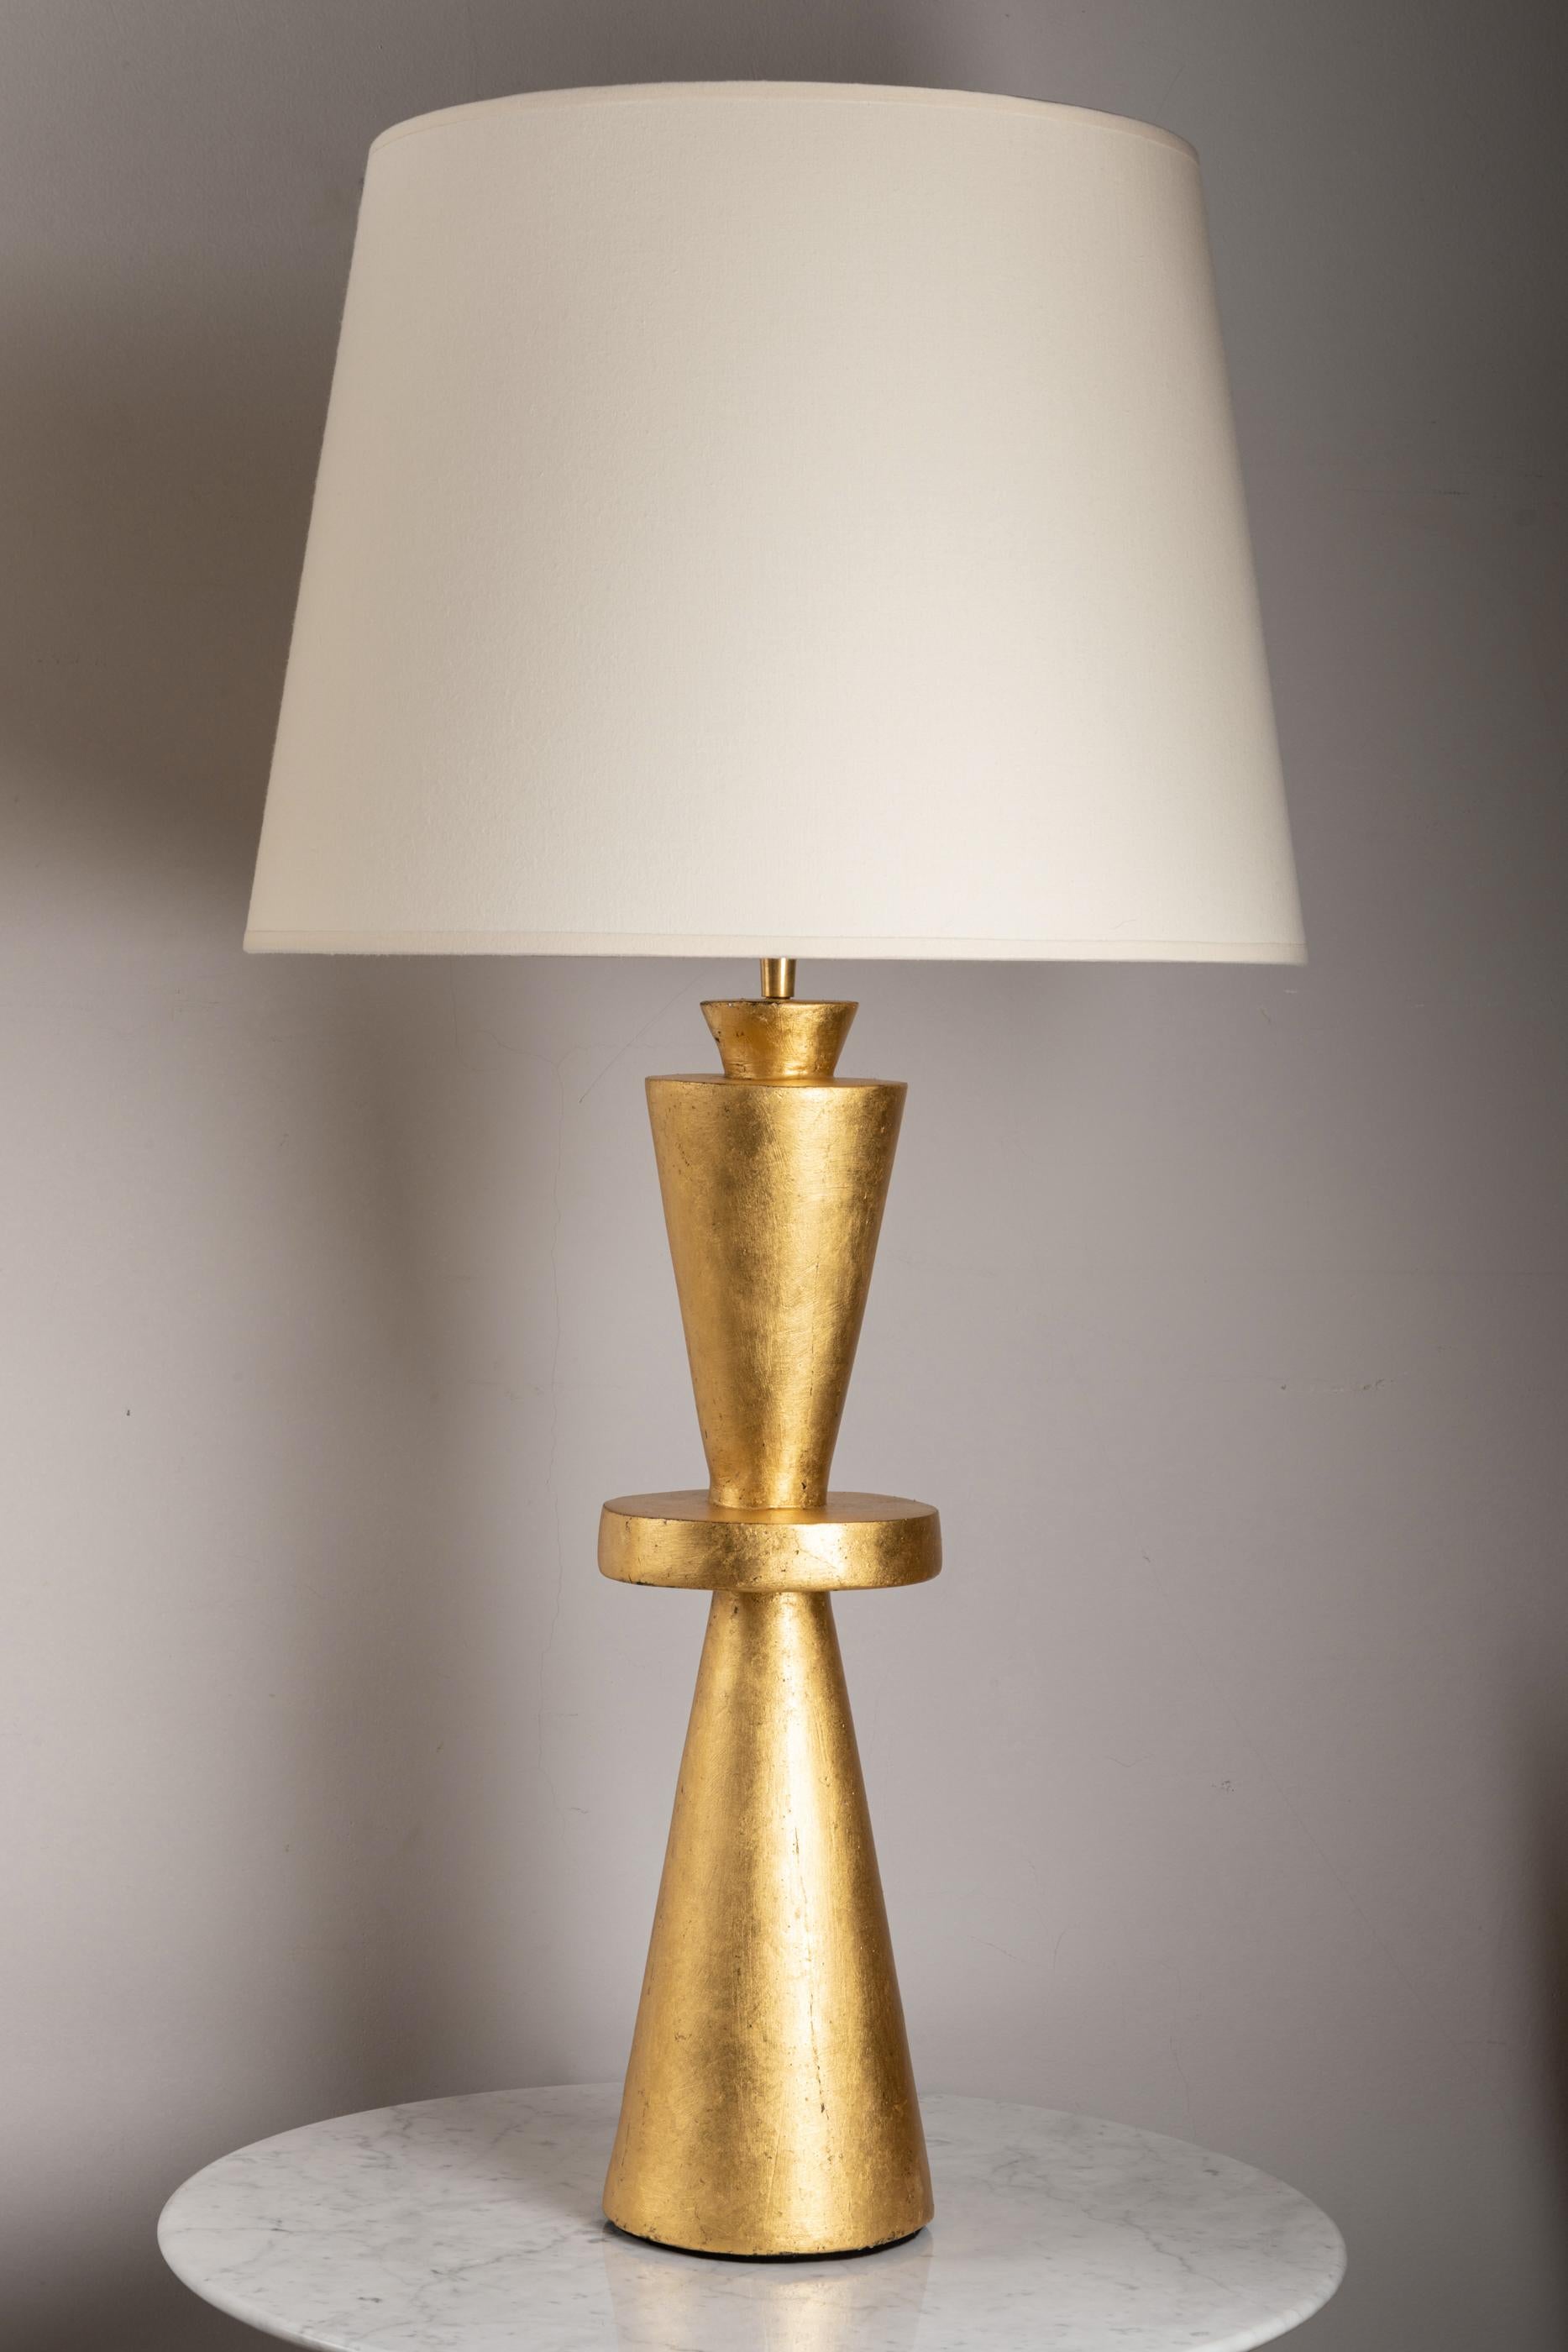 Pair of plaster lamps. 
Hand gilded with 22 carat gold leave 
With custom made shades.
France, contemporary creation
Wired for Europe.

Measures: 
Total height : 86.5cm - 34 inches
Plaster base height : 52.5 cm - 20.7 inches
Diameter